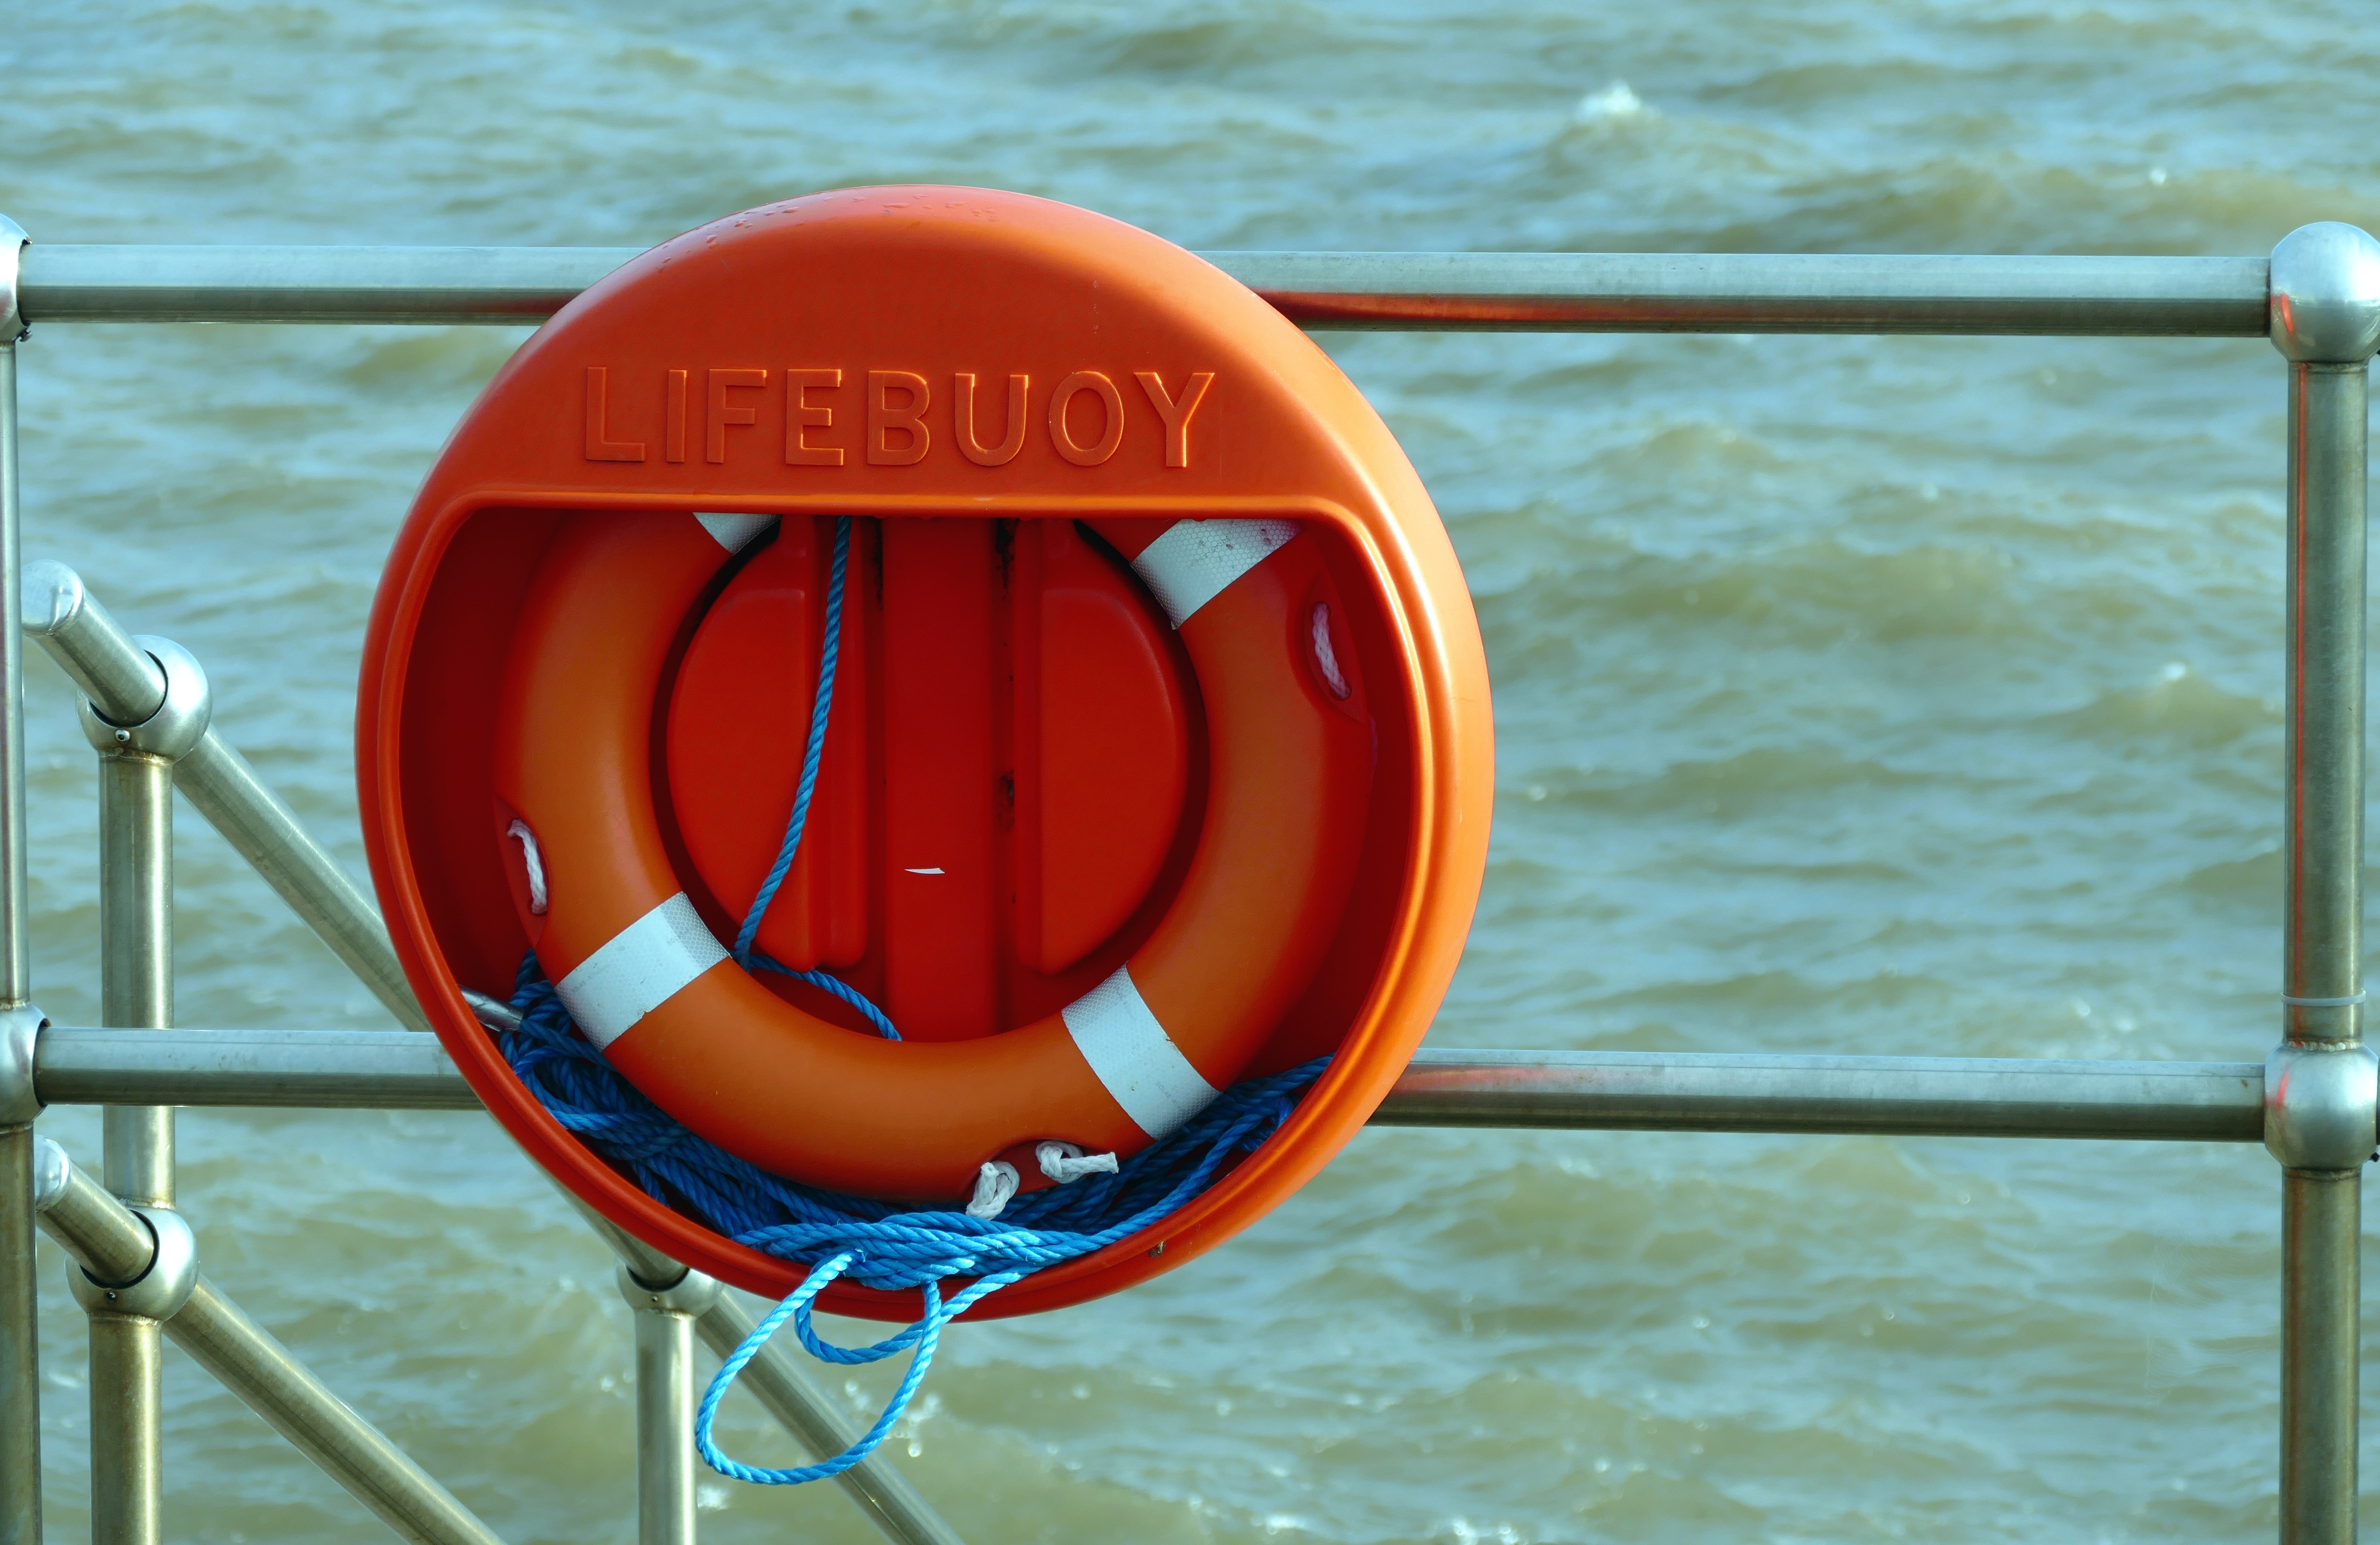 Help, Safety, Lifebuoy, Buoy, Rescue, circle, water